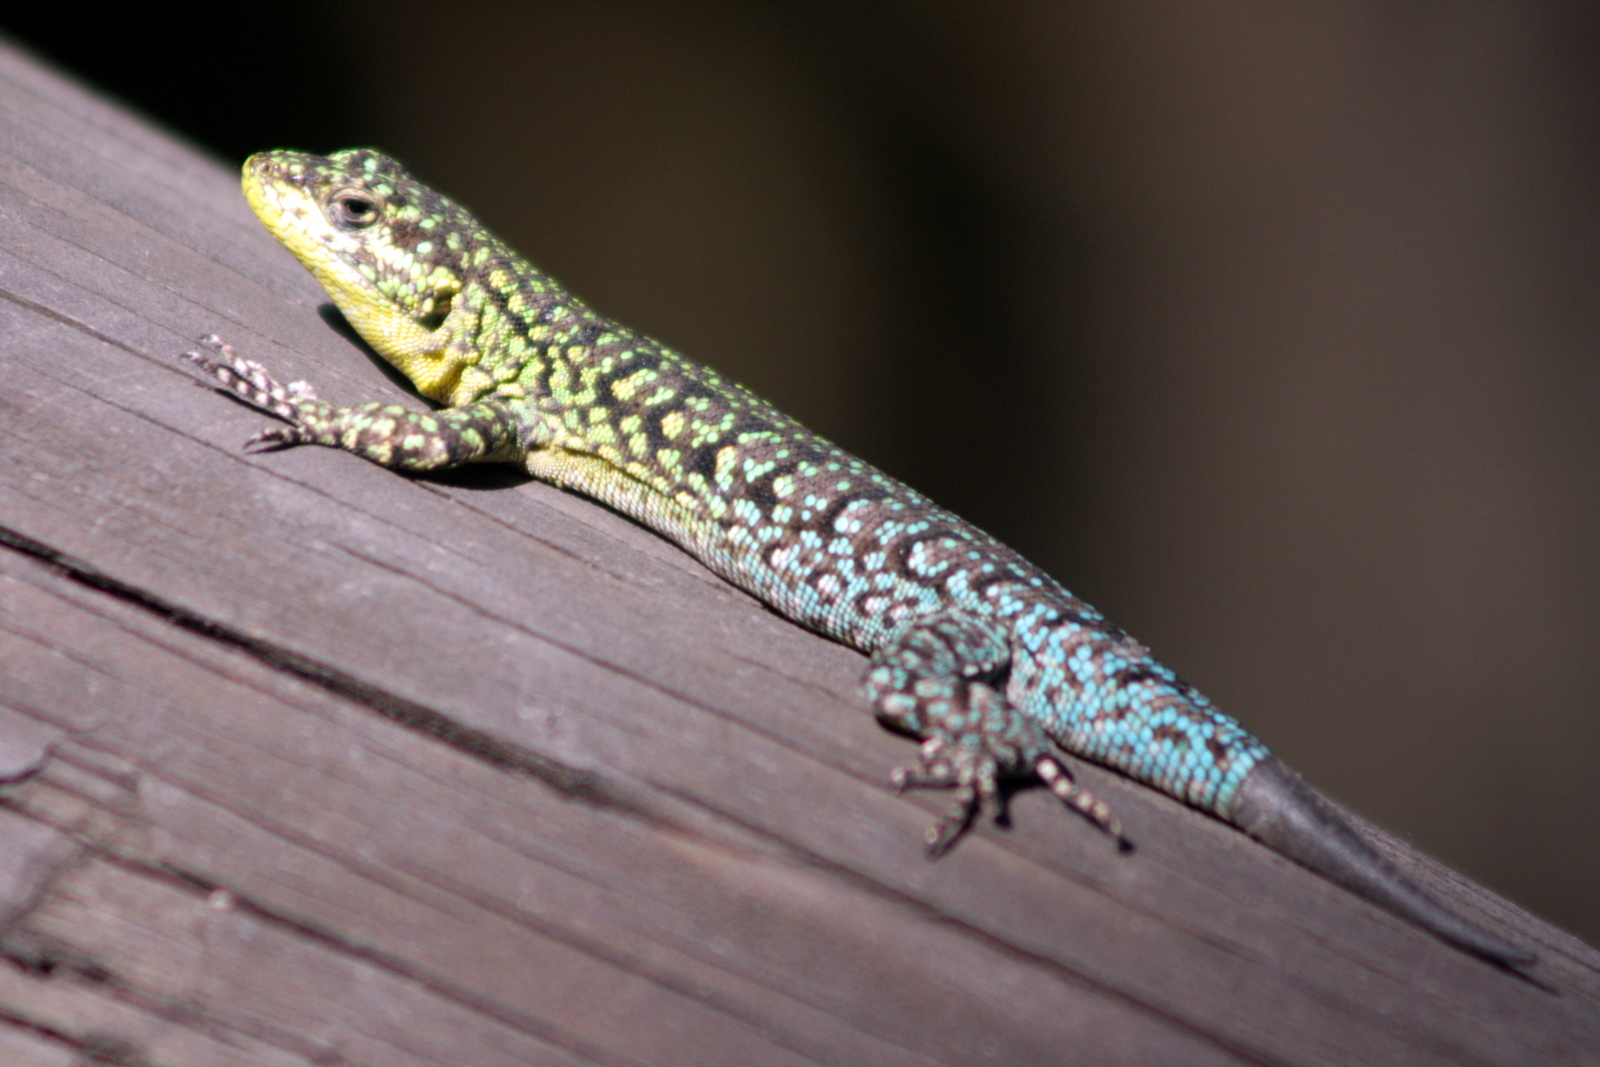 a lizard is standing on top of the wood